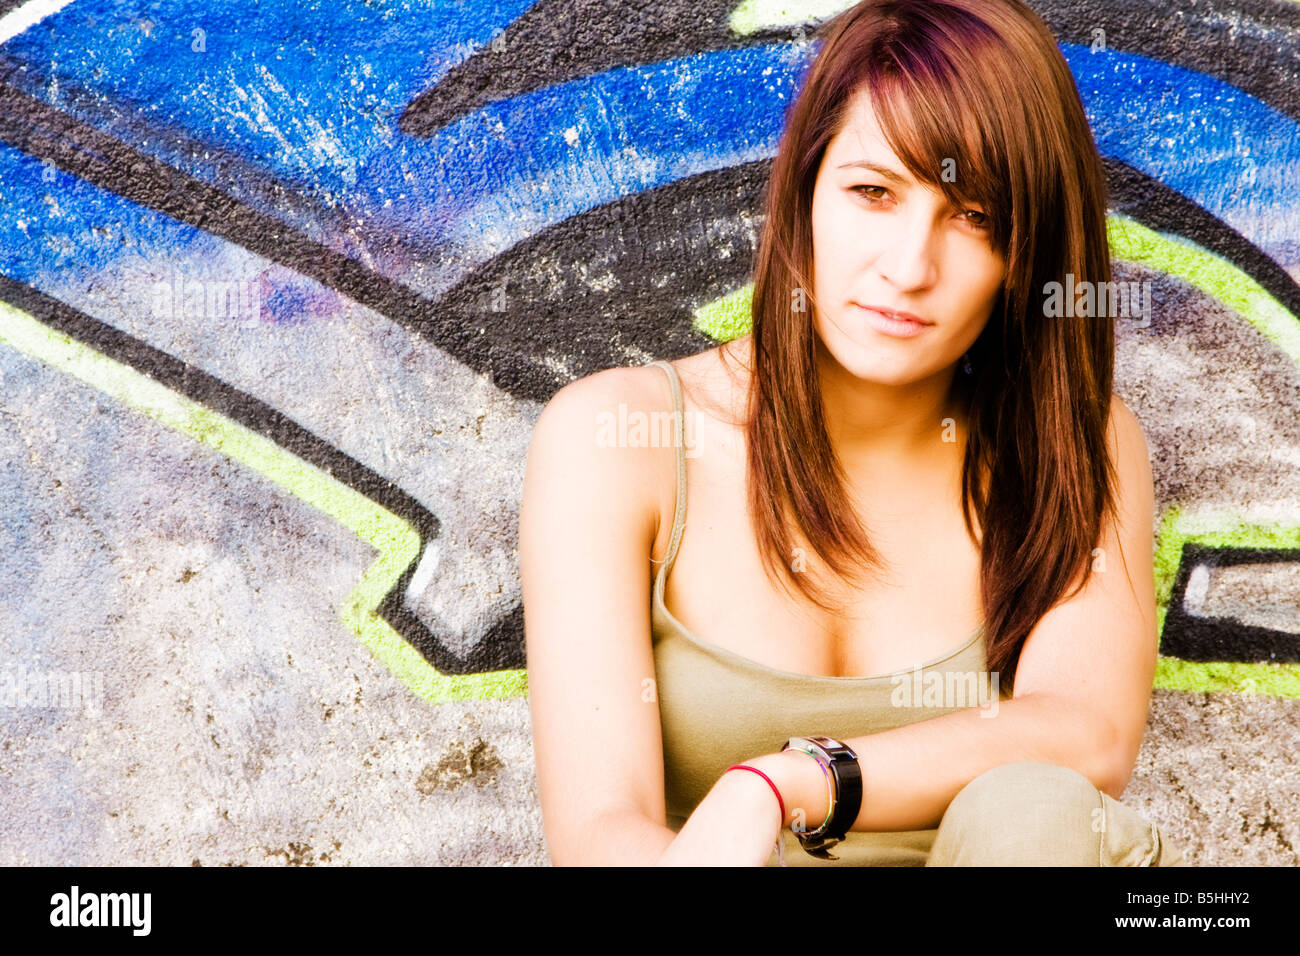 Young woman in casual clothing staring at camera Stock Photo